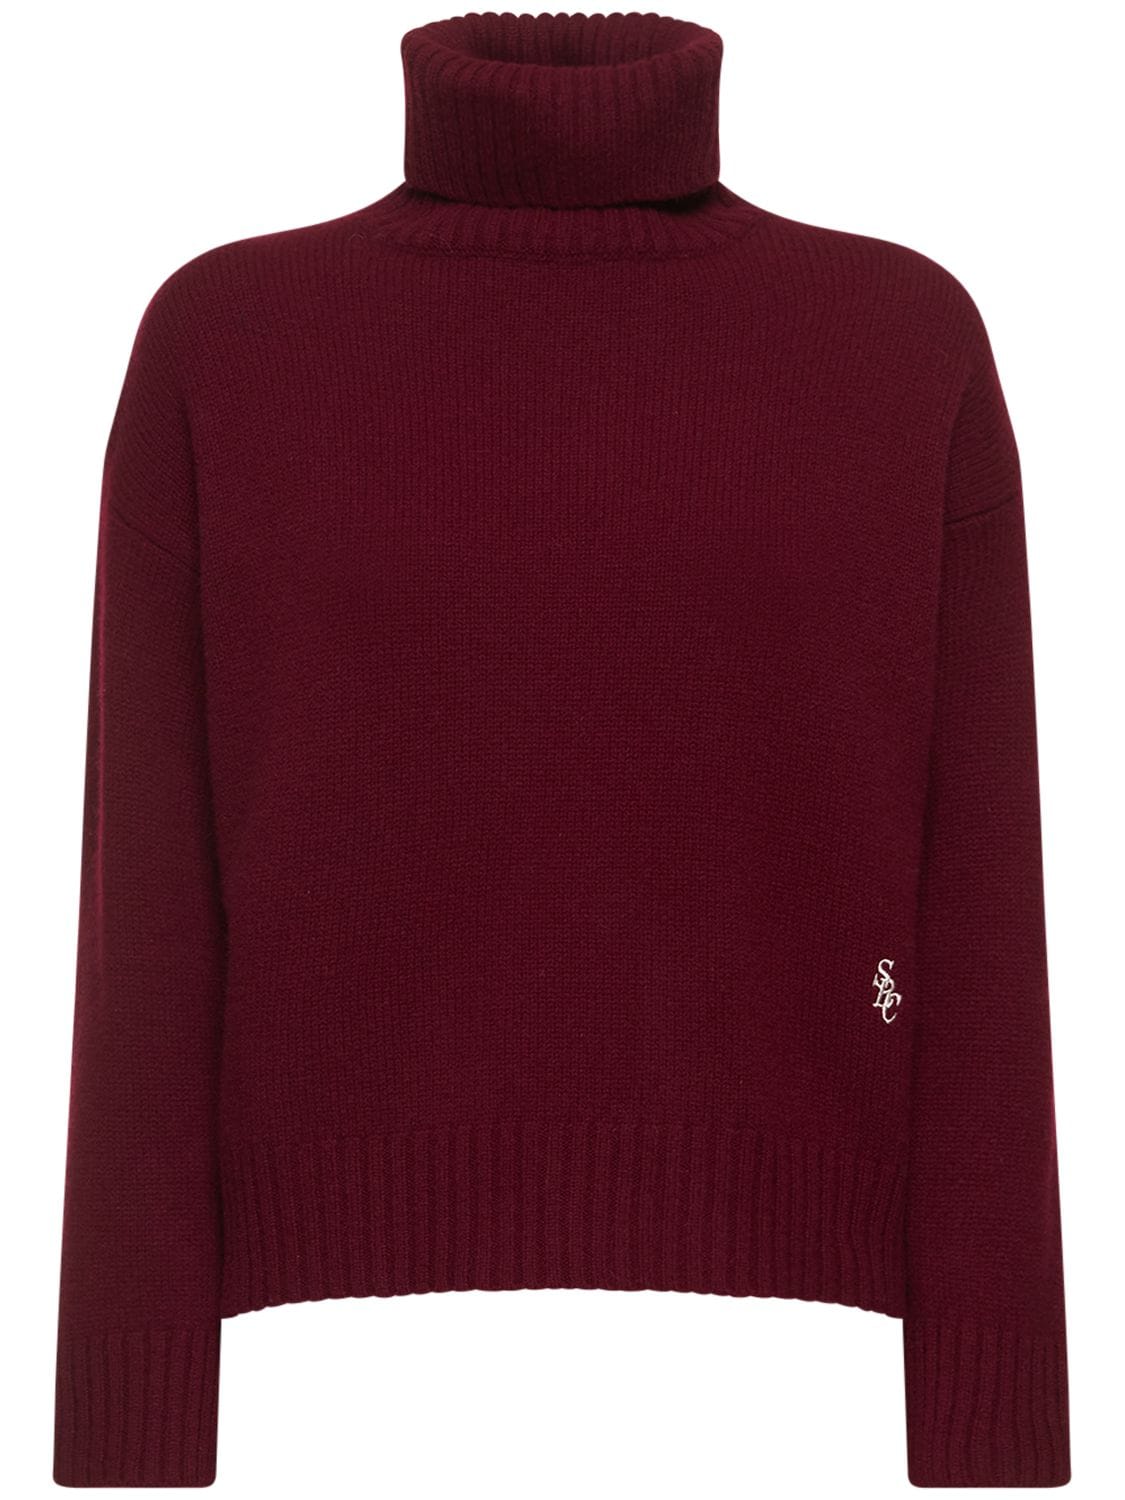 SPORTY AND RICH SRC TURTLENECK SWEATER